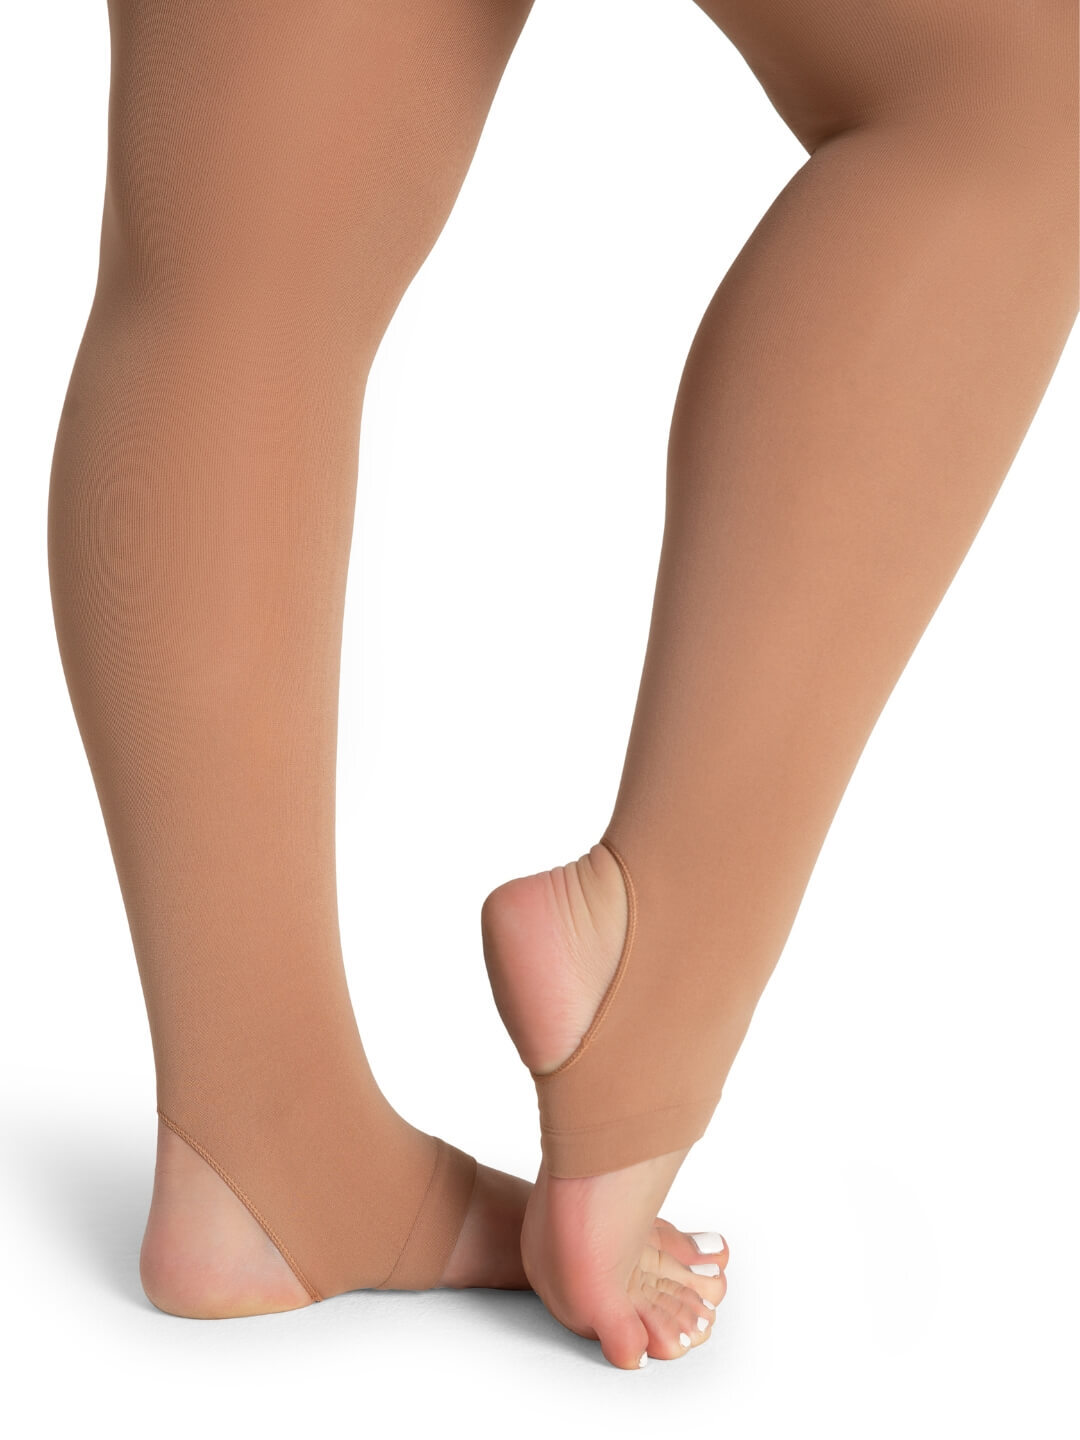 Buy CAPEZIO ULTRA SOFT SELF KNIT TRANSITION TIGHTS-CHILDREN'S Online at  $15.00